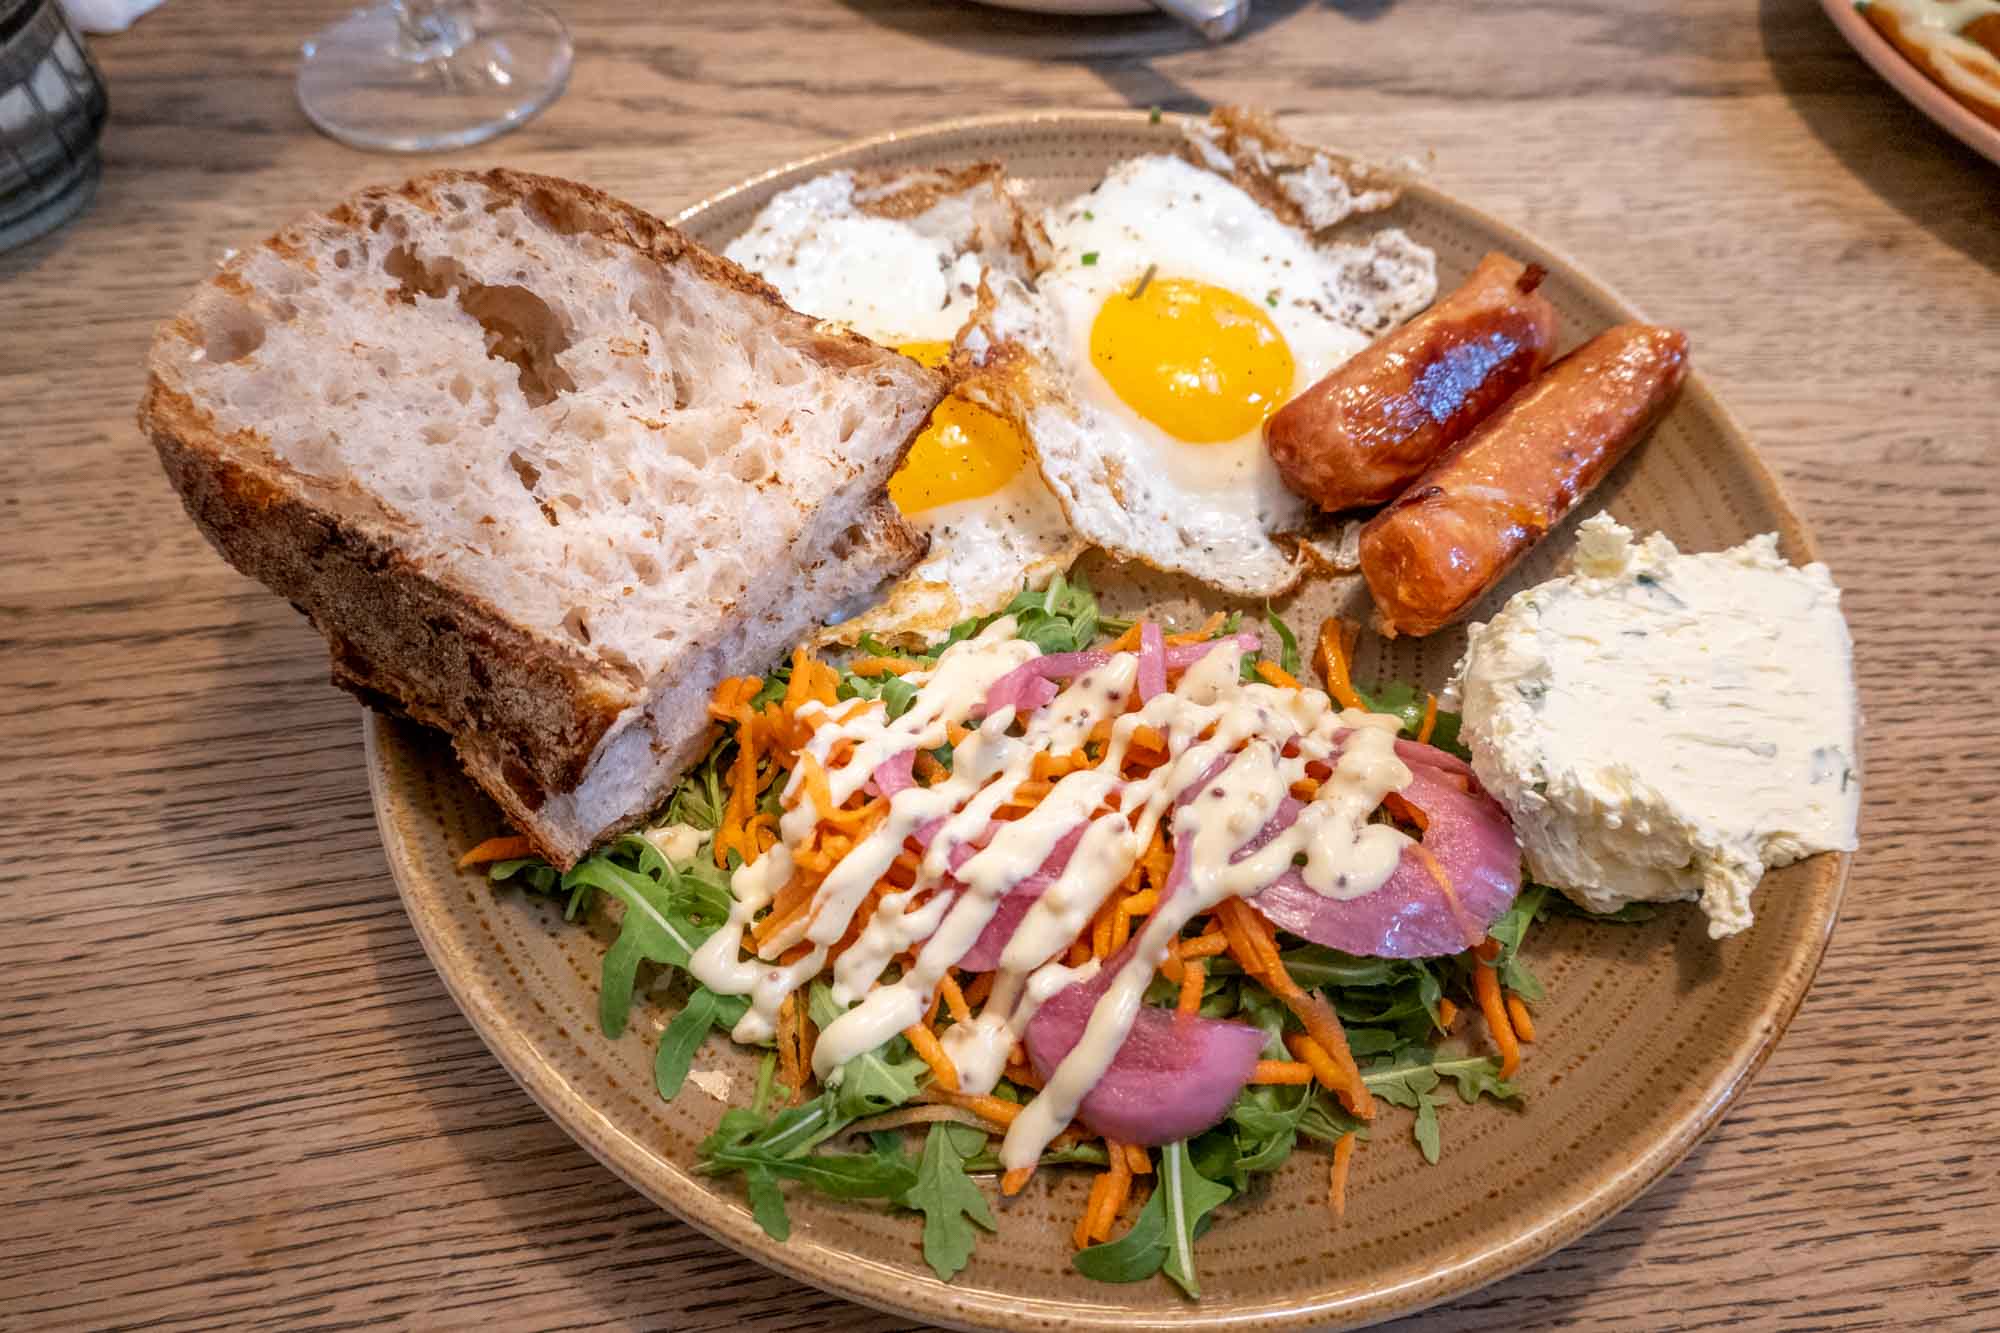 Eggs, sausage, bread and salad on a plate